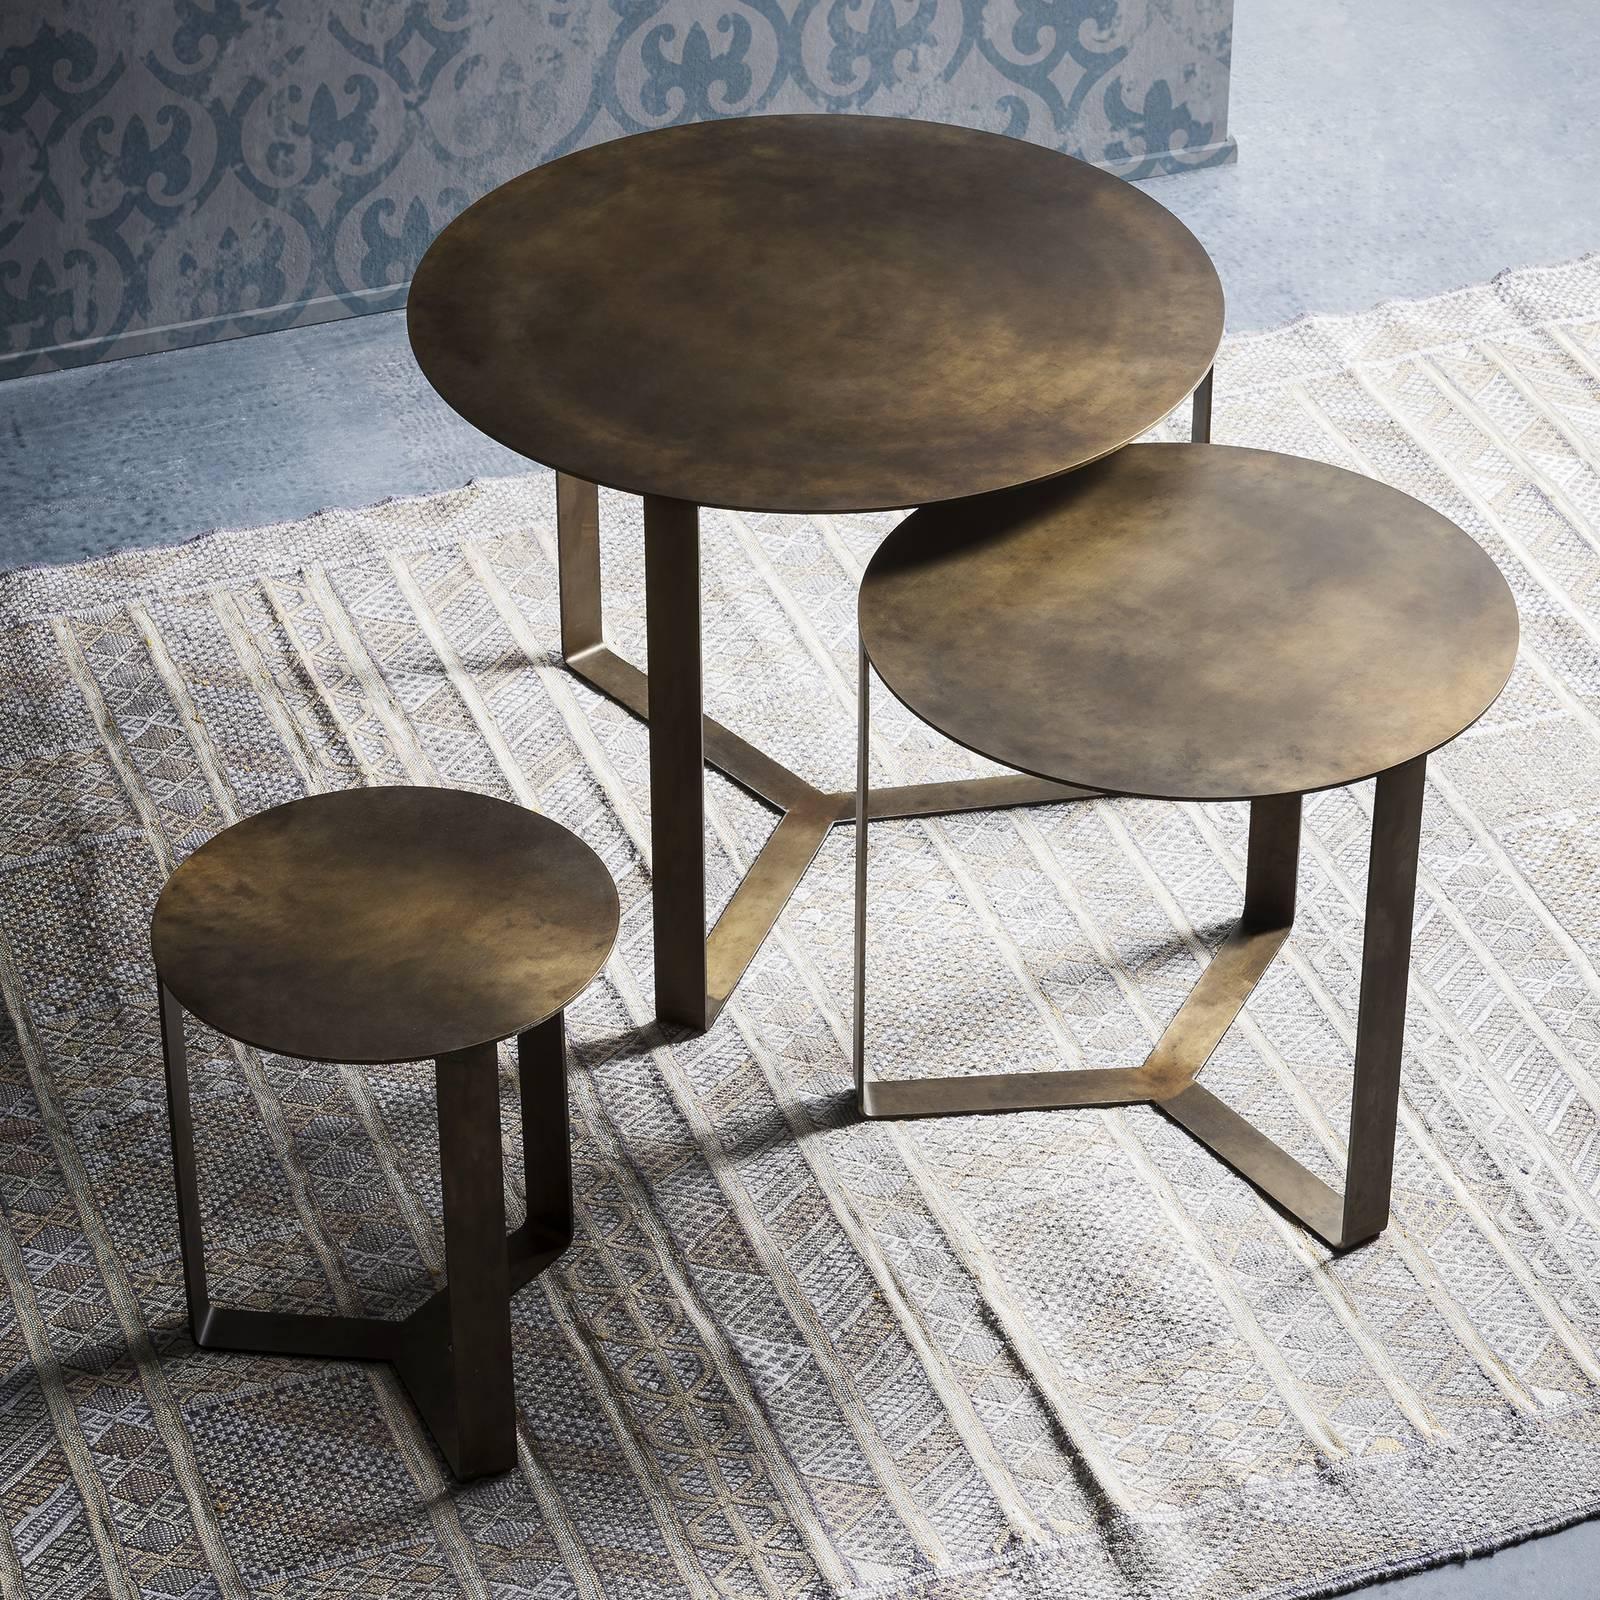 This stackable coffee-table is rendered using laser-cut metal. The streamlined Silhouette features a round tabletop supported by three legs arranged in a pinwheel formation connected at a central point. The hand-applied, engraved, non-toxic resin